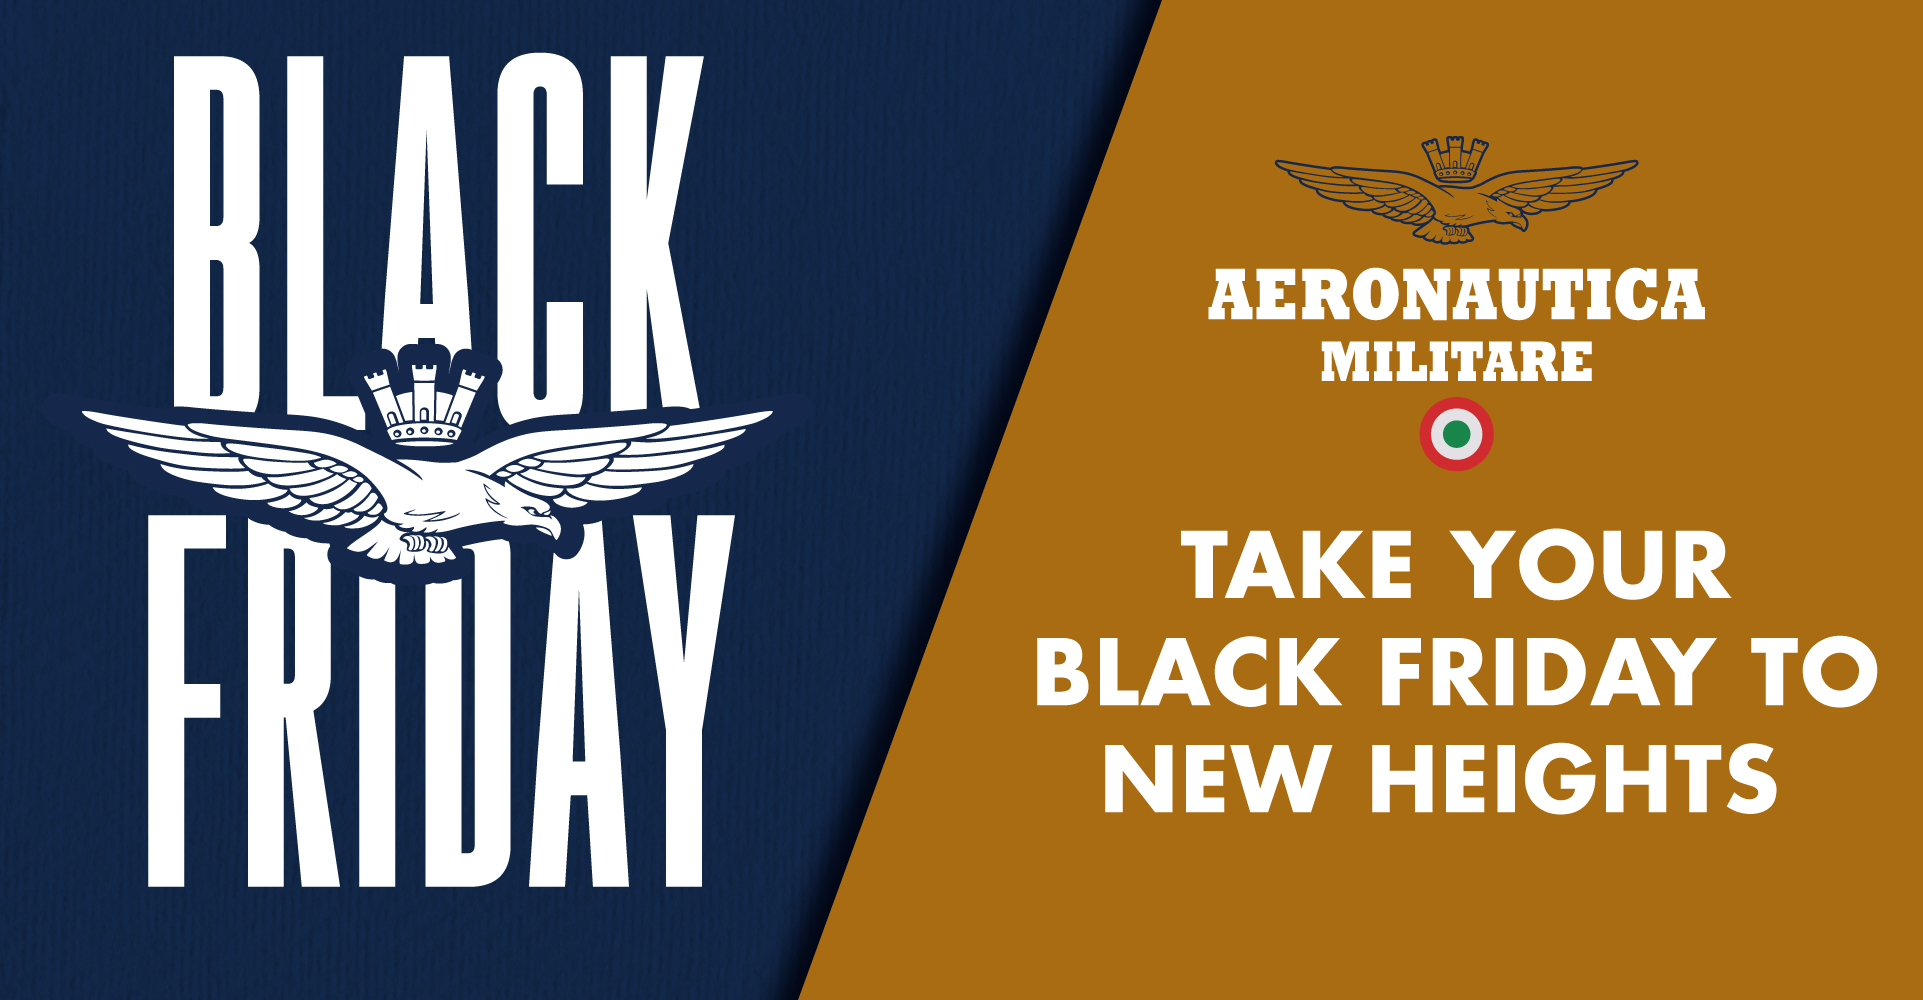 Take Your Black Friday To New Heights With Aeronautica Militare's High-Flying Shopping Strategies!